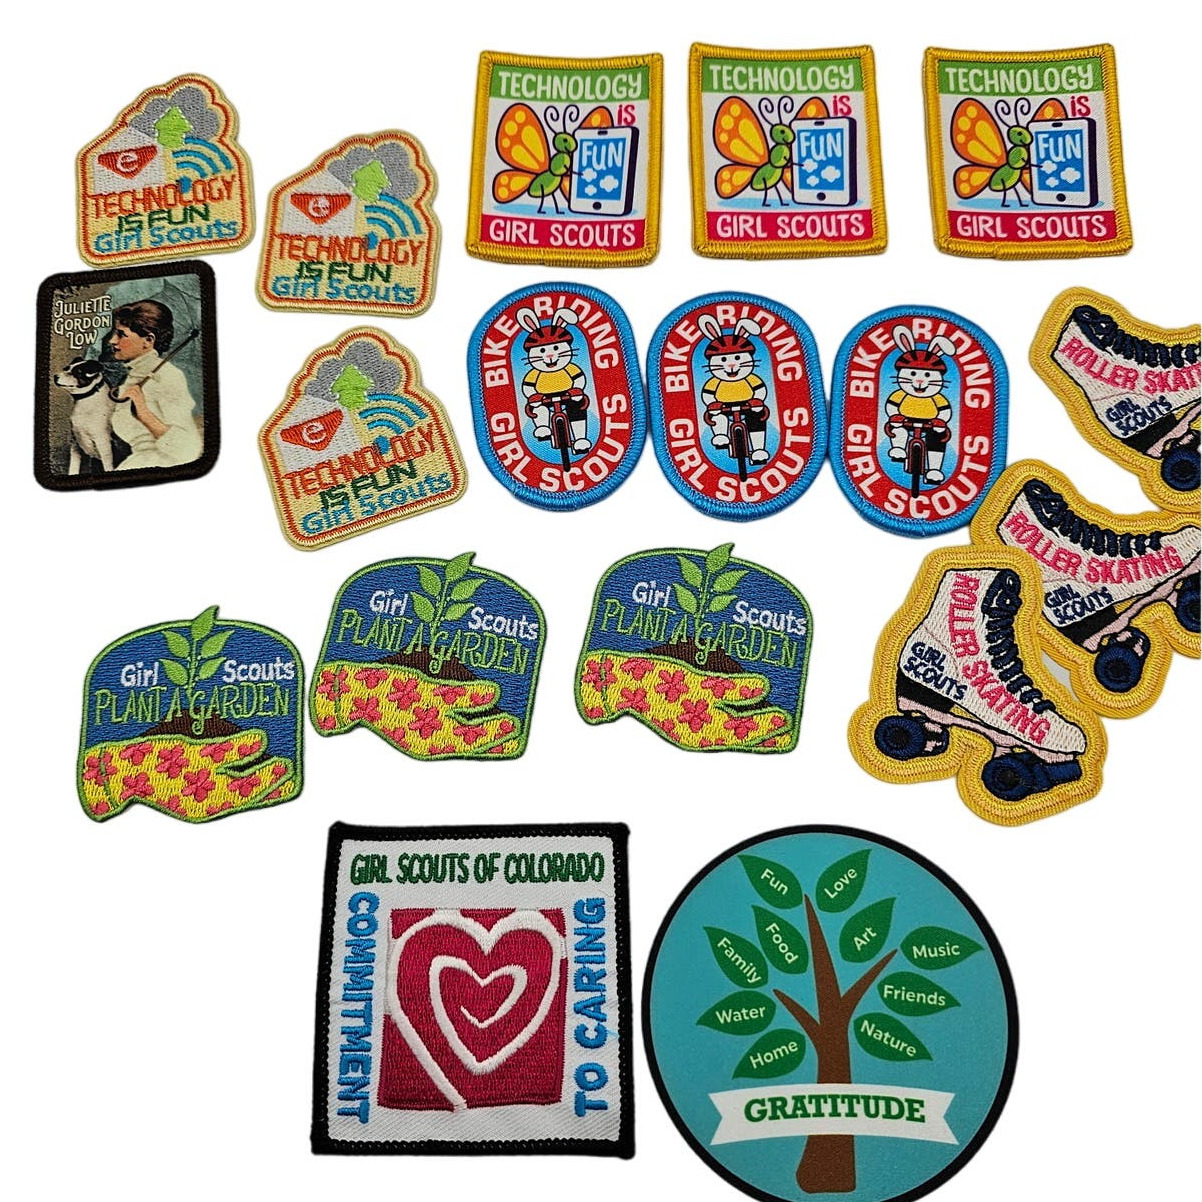 Lot of 18 Girl Scout Patches Technology Bike Riding Roller Skate Gratitude Etc